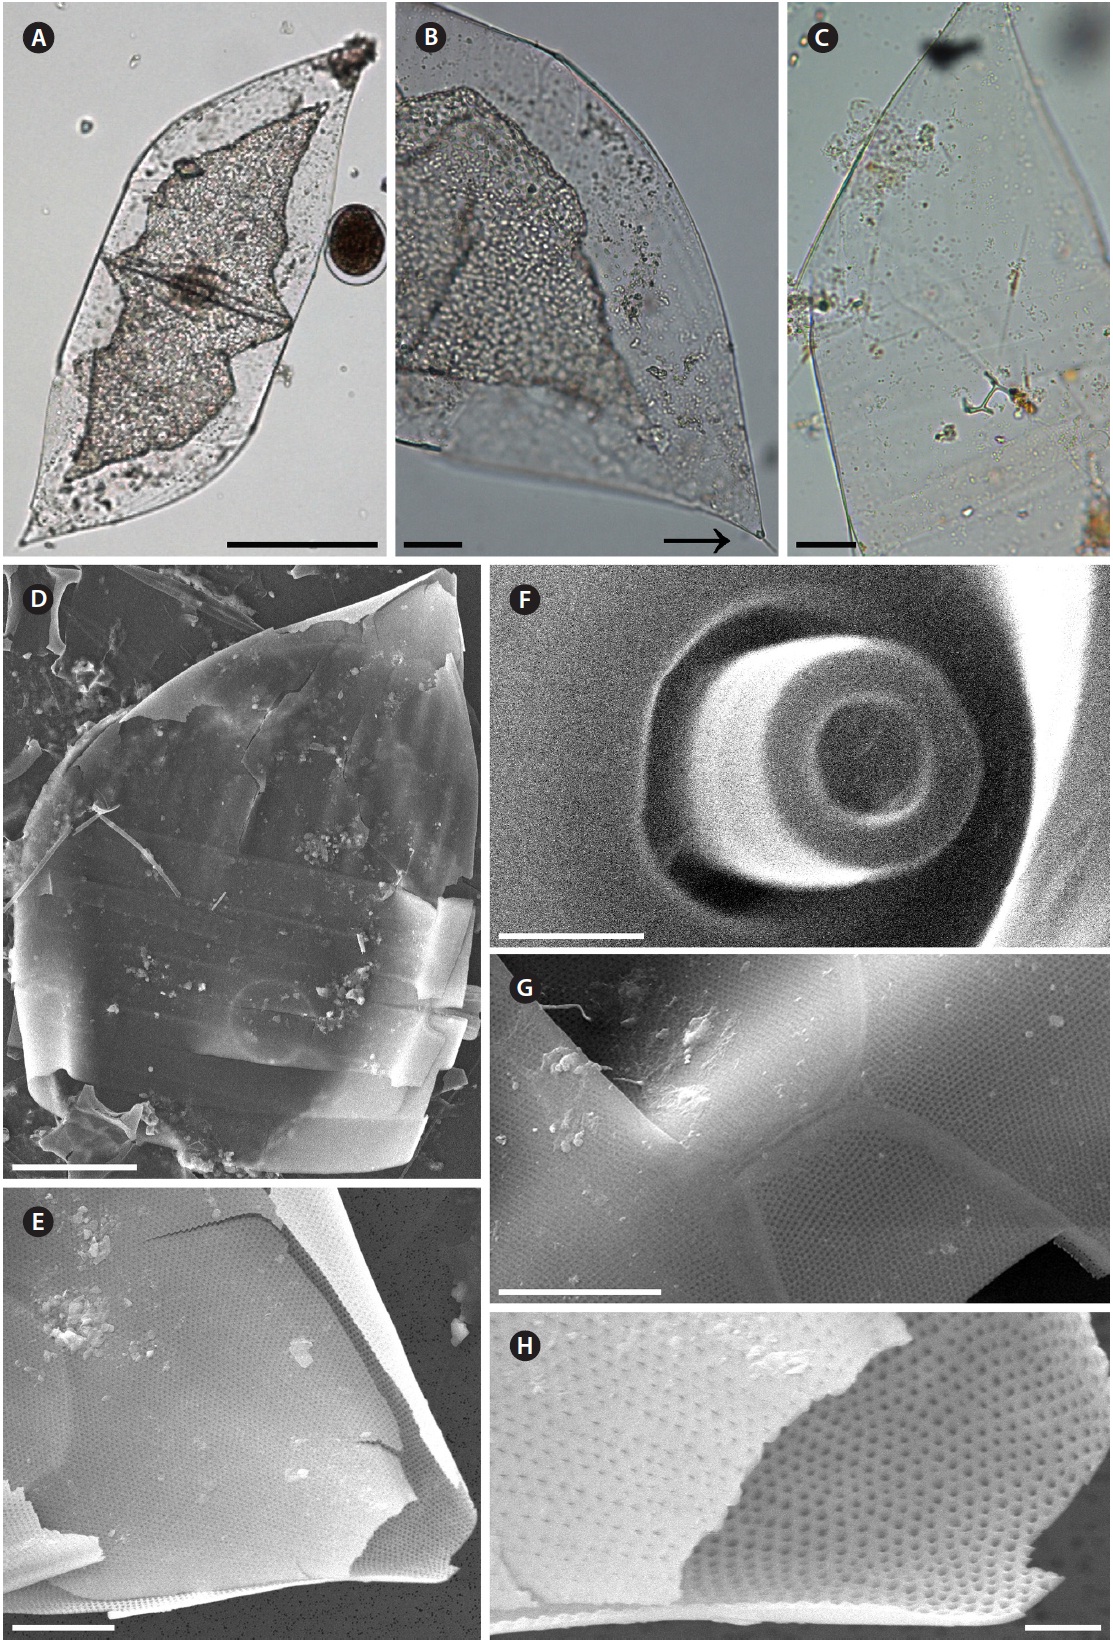 Neocalyptrella robusta. (A) A complete cell, light microscopy (LM). (B) Apical part of valve, external tube at the valve apex (arrow), LM. (C) Apical part of valve, valve with part of the cingulum, LM. (D) Apical part of valve, valve with part of the cingulum, scanning electron microscopy (SEM). (E) Striation at valve apex, SEM. (F) Valve apex showing calyptra structure and external tube, SEM. (G) Detail of cingulum; cingulum ends in an obtuse straight line, SEM. (H) Details of Fig. 3E loculate areolae, SEM. Scale bars represent: A, 100 μm; B & C, 20 μm; D, 50 μm; E & G, 10 μm; F, 0.5 μm; H, 2 μm.